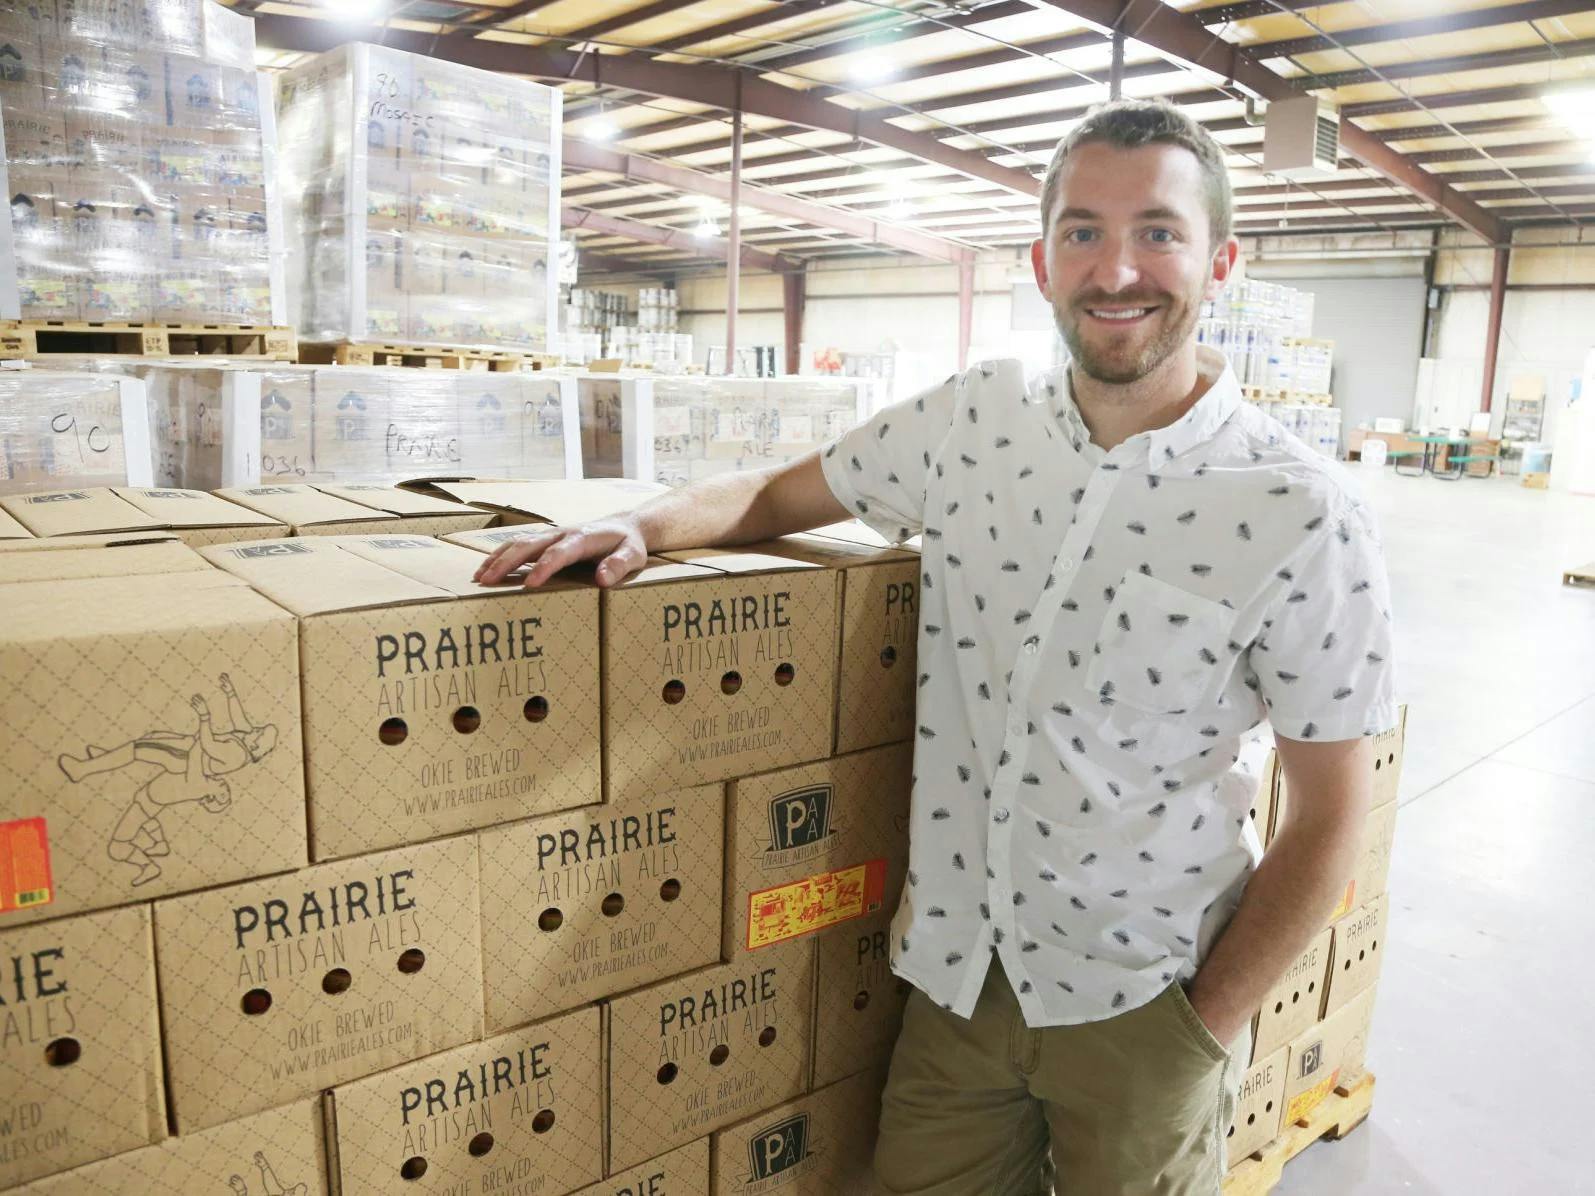 A man stands next to a stack of boxes of Prairie beer